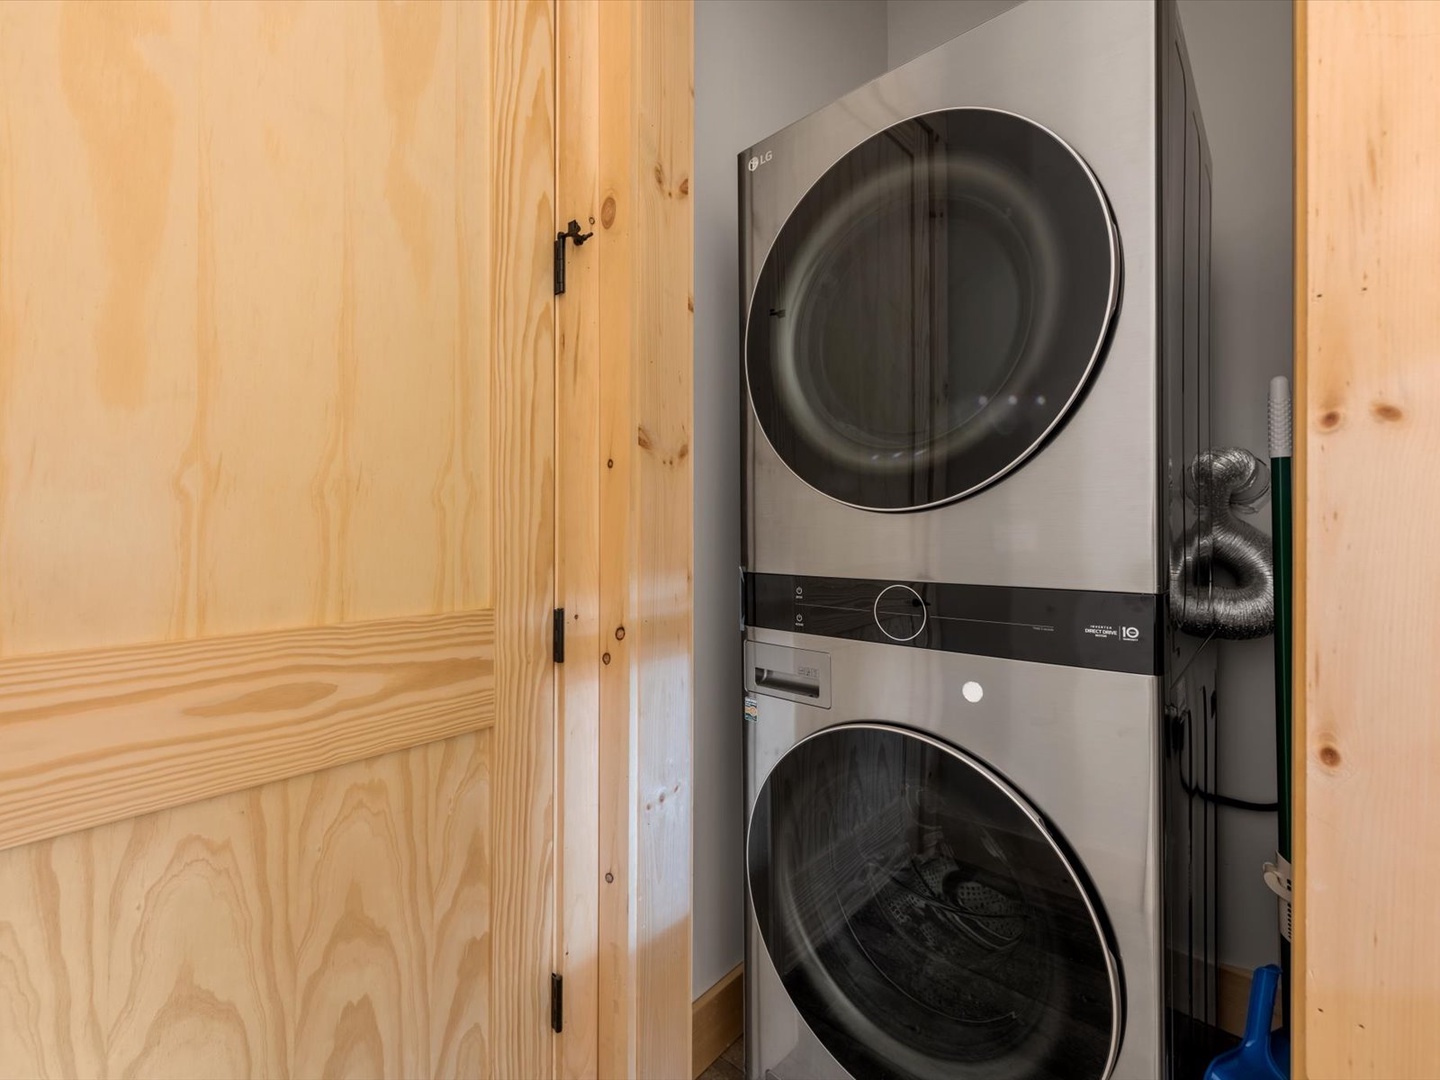 Creek Songs- Entry level laundry room